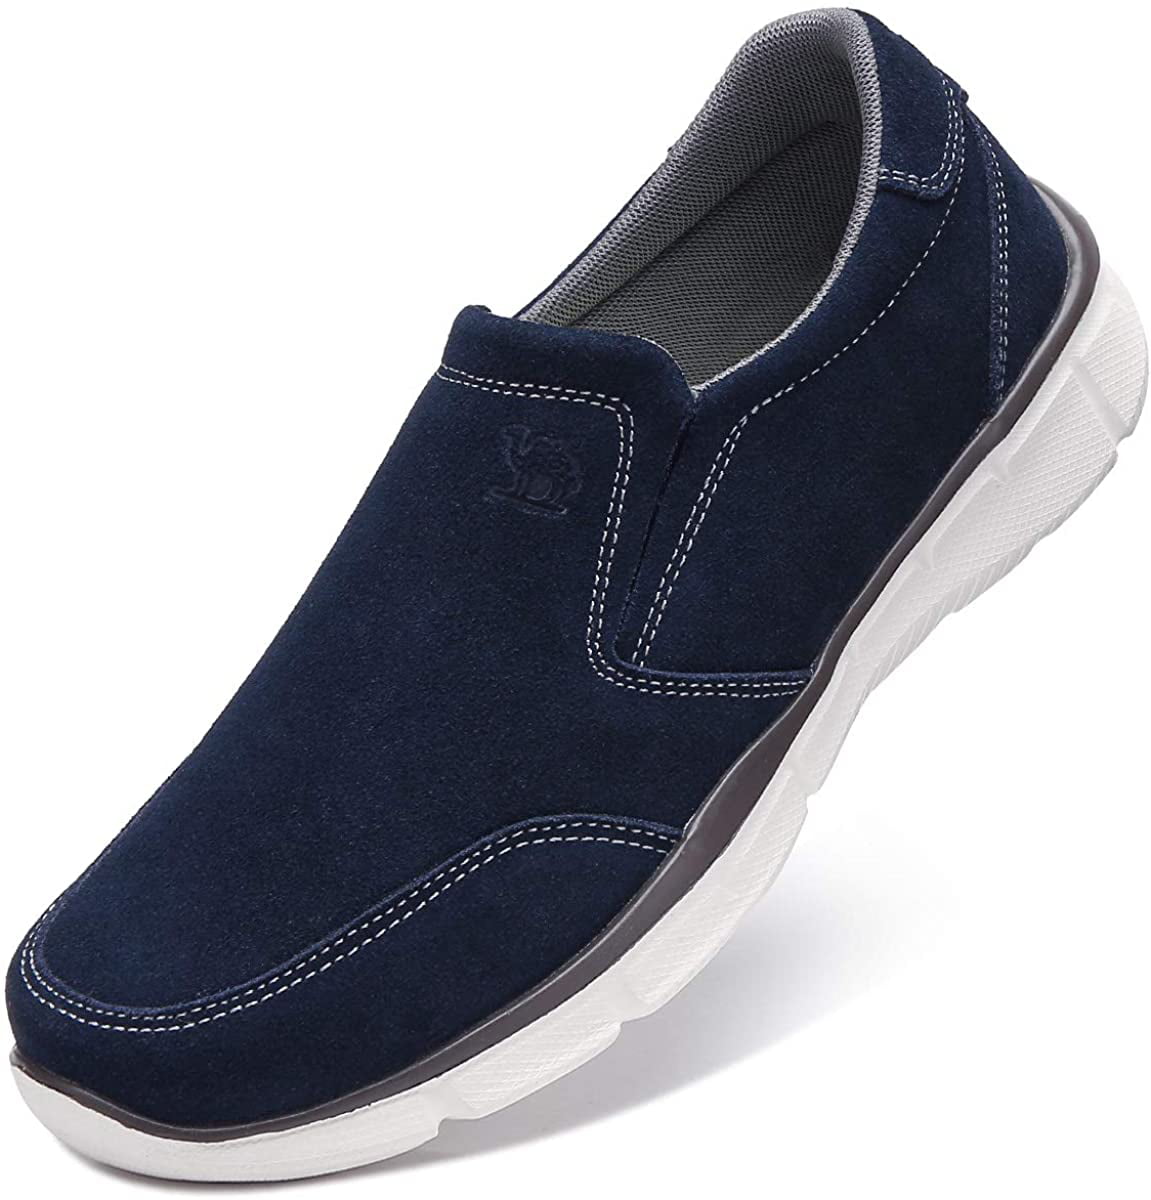 Mens New Navy Casual Slip On Leisure Shoes Comfort 6 7 8 9 10 11 12 